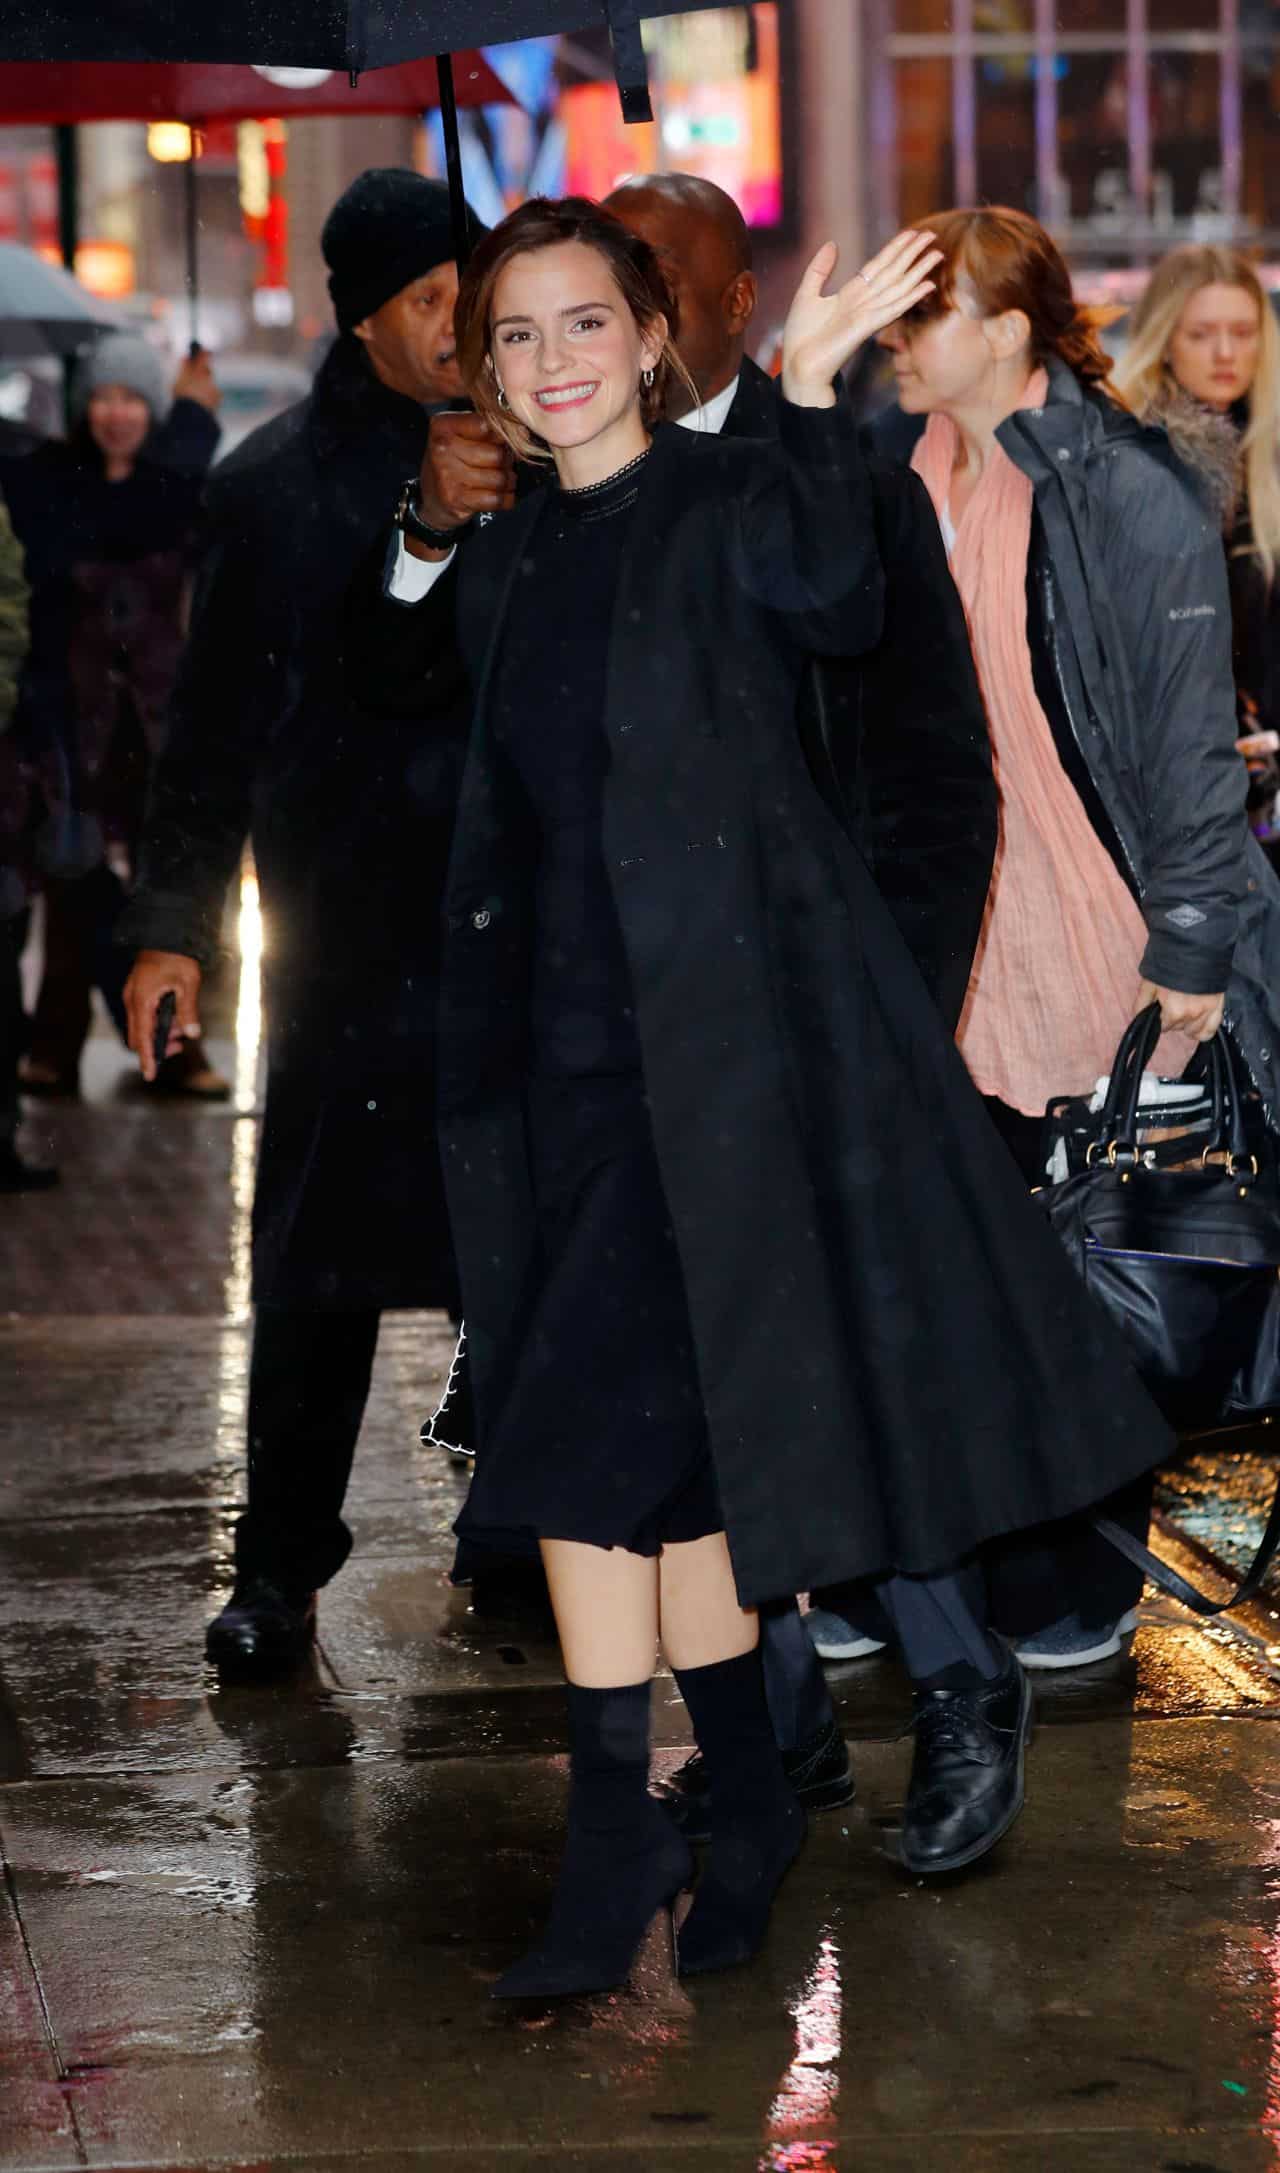 Emma Watson Arrives at "Good Morning America" TV Show in NYC